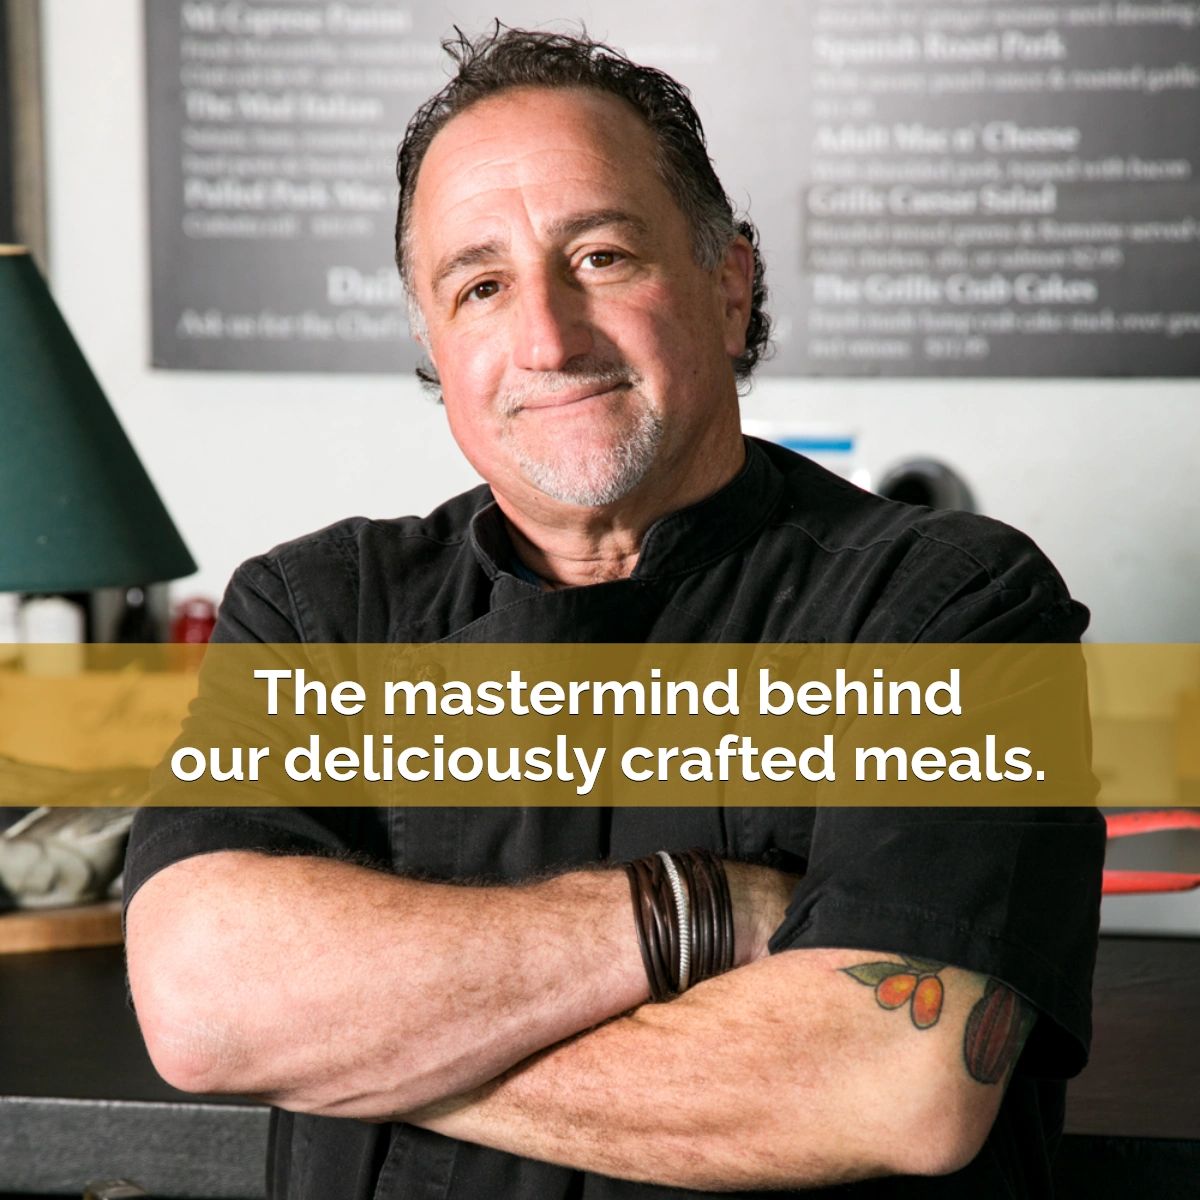 Experience a culinary adventure like no other as Chef Martin Corso works his magic in our kitchen. His mouthwatering creations will awaken your senses and leave your taste buds begging for more. #CulinaryMaster #FoodieHeaven #ChefMartinCorso #TheChefsGrille